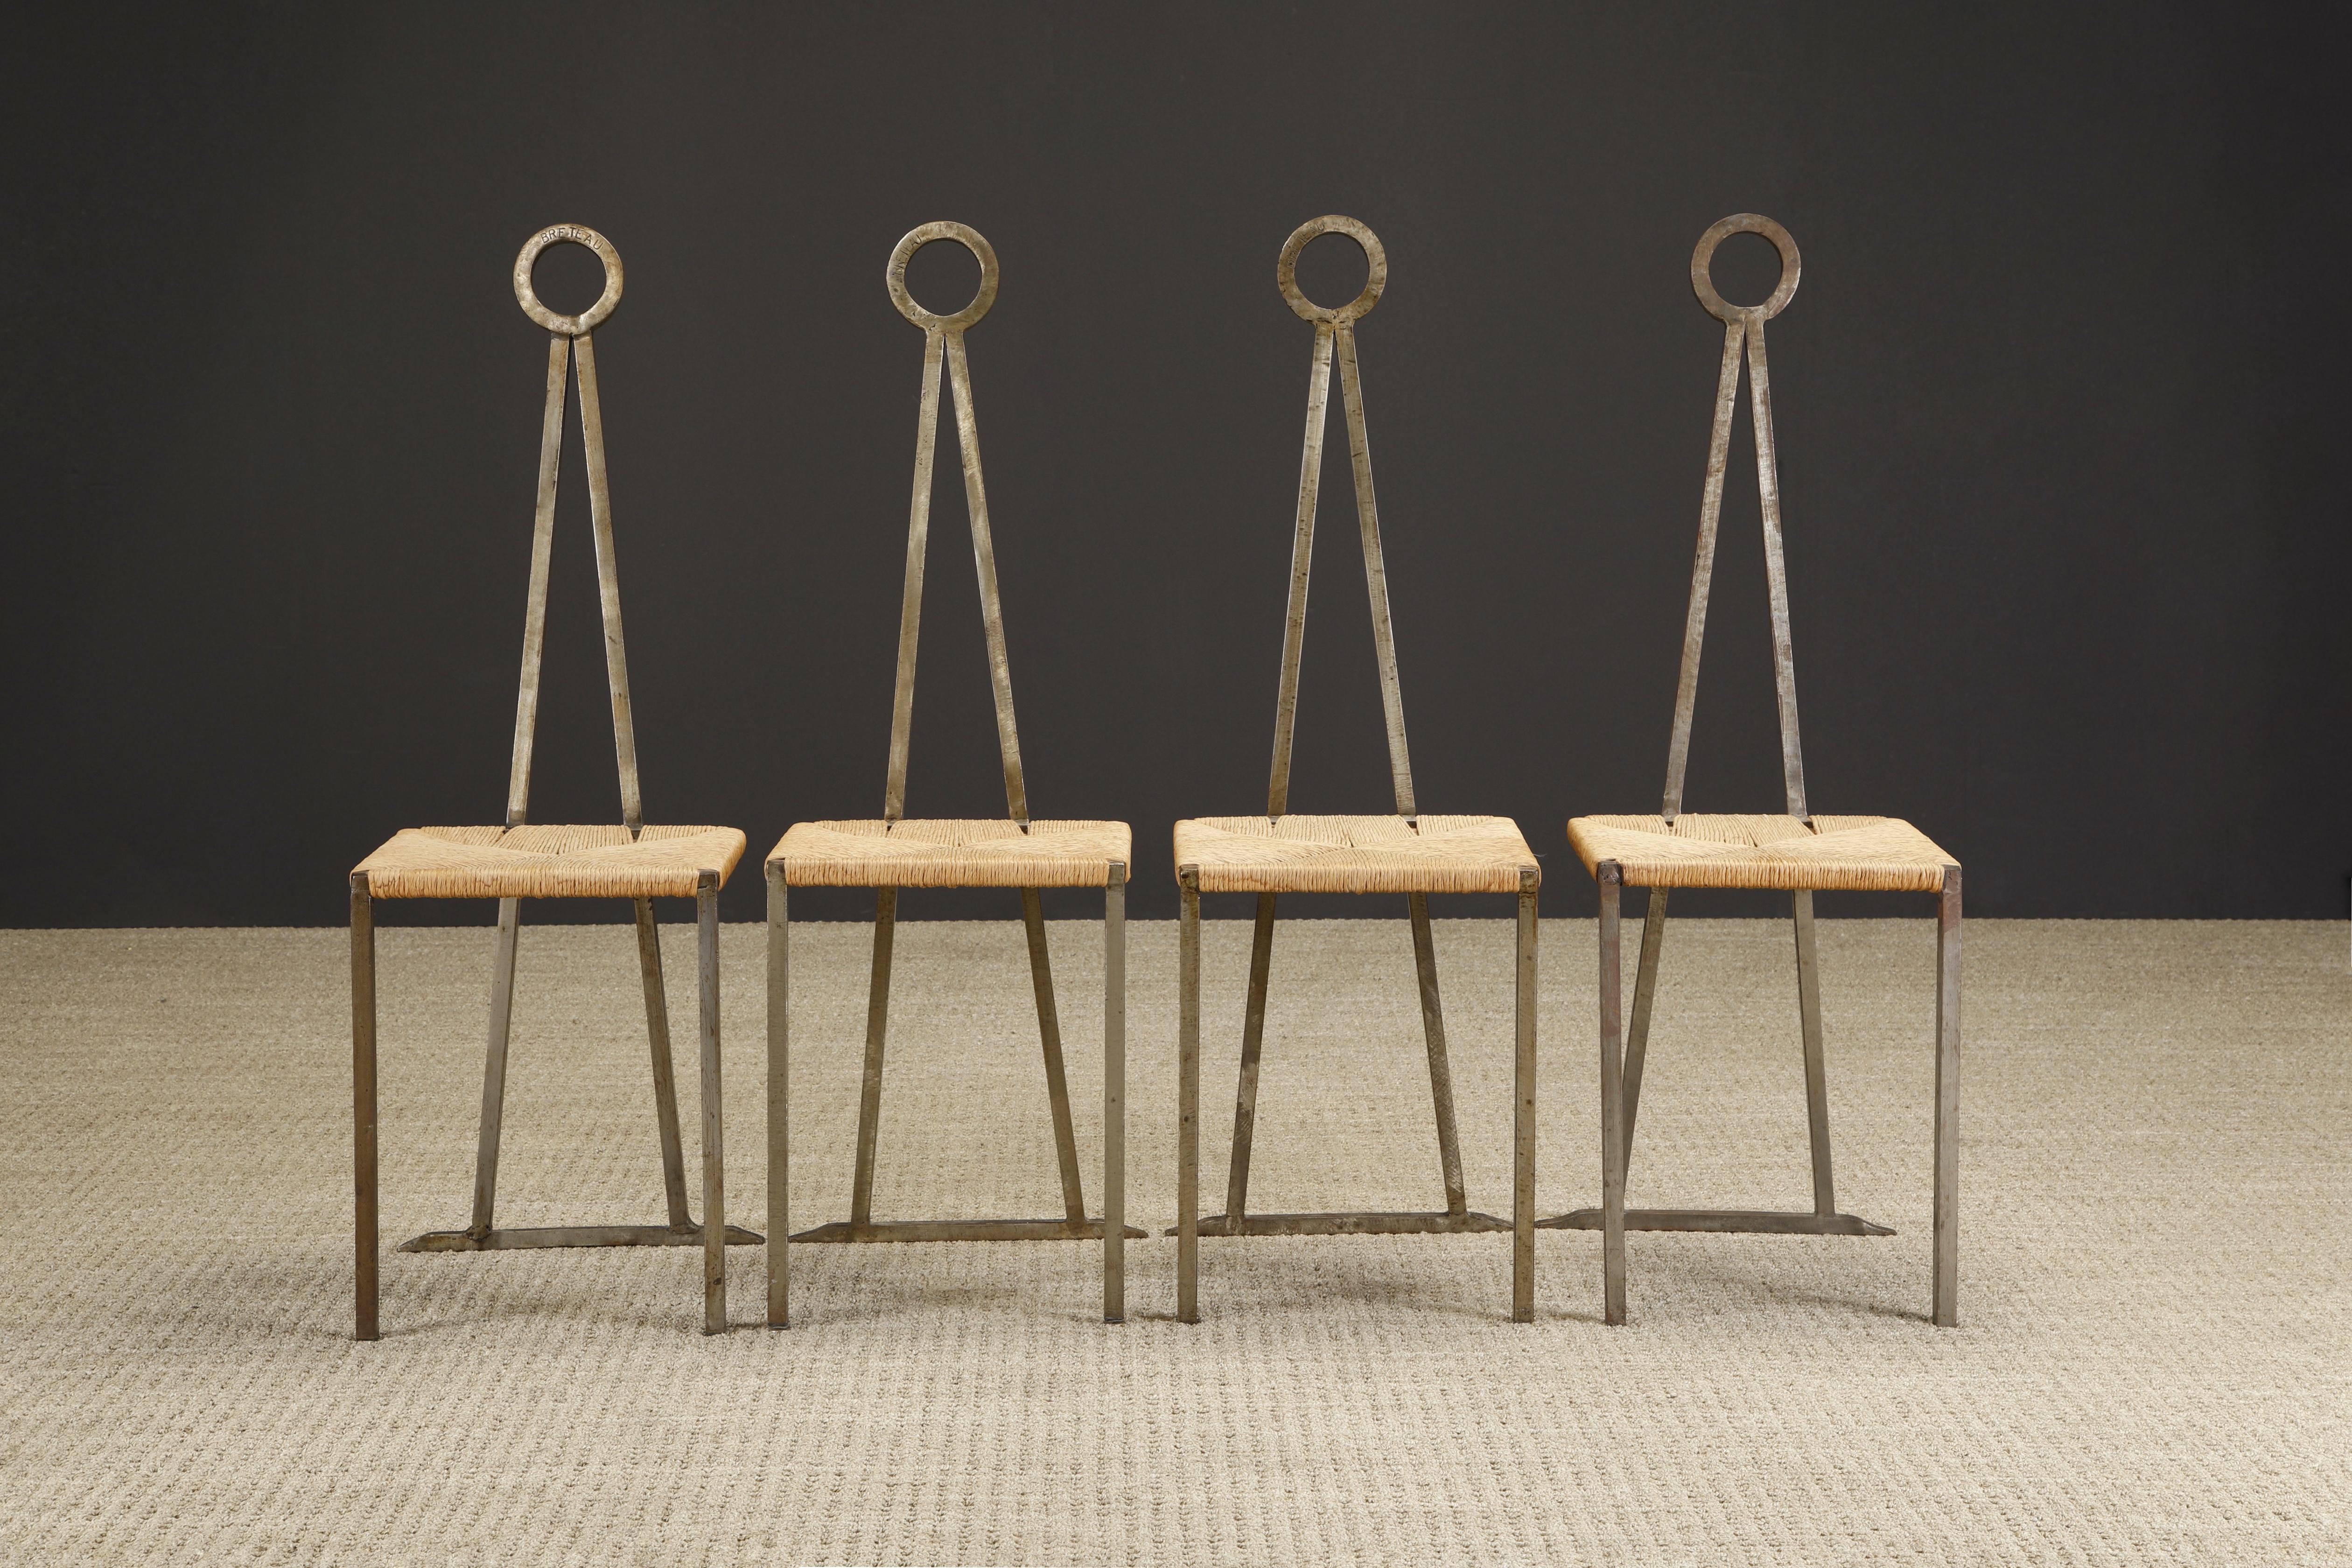 An exceptionally unique set of wrought iron chairs stamped 'BRETEAU' with rope corded seats, circa 1955 France. 

A similar chair sold in 2009 at Christie's, sold as 'Jean Luc Breteau'. This chair was also stamped and hand crafted in the same